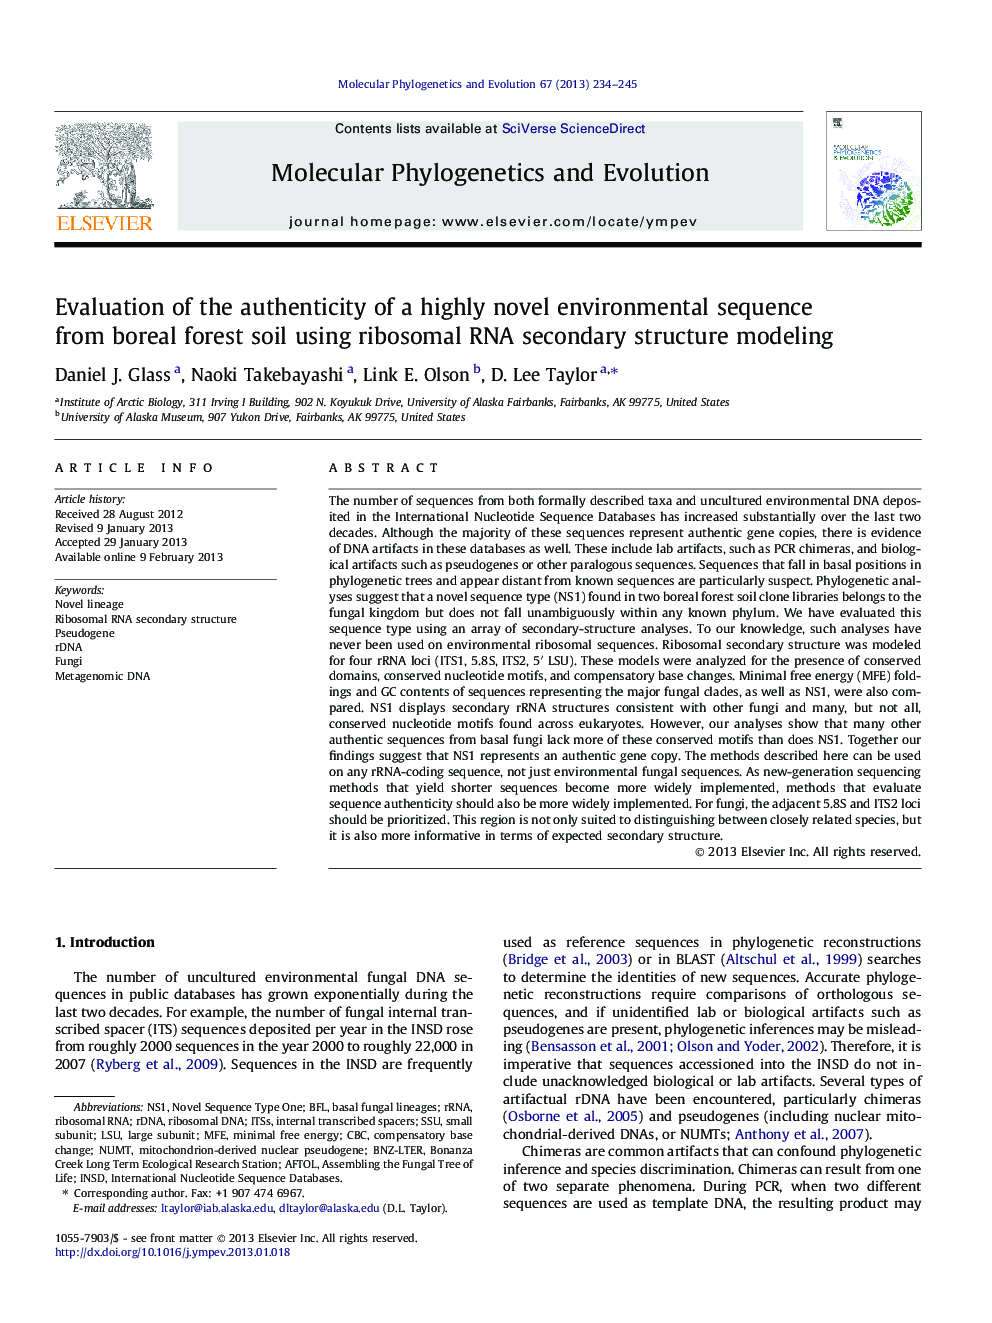 Evaluation of the authenticity of a highly novel environmental sequence from boreal forest soil using ribosomal RNA secondary structure modeling